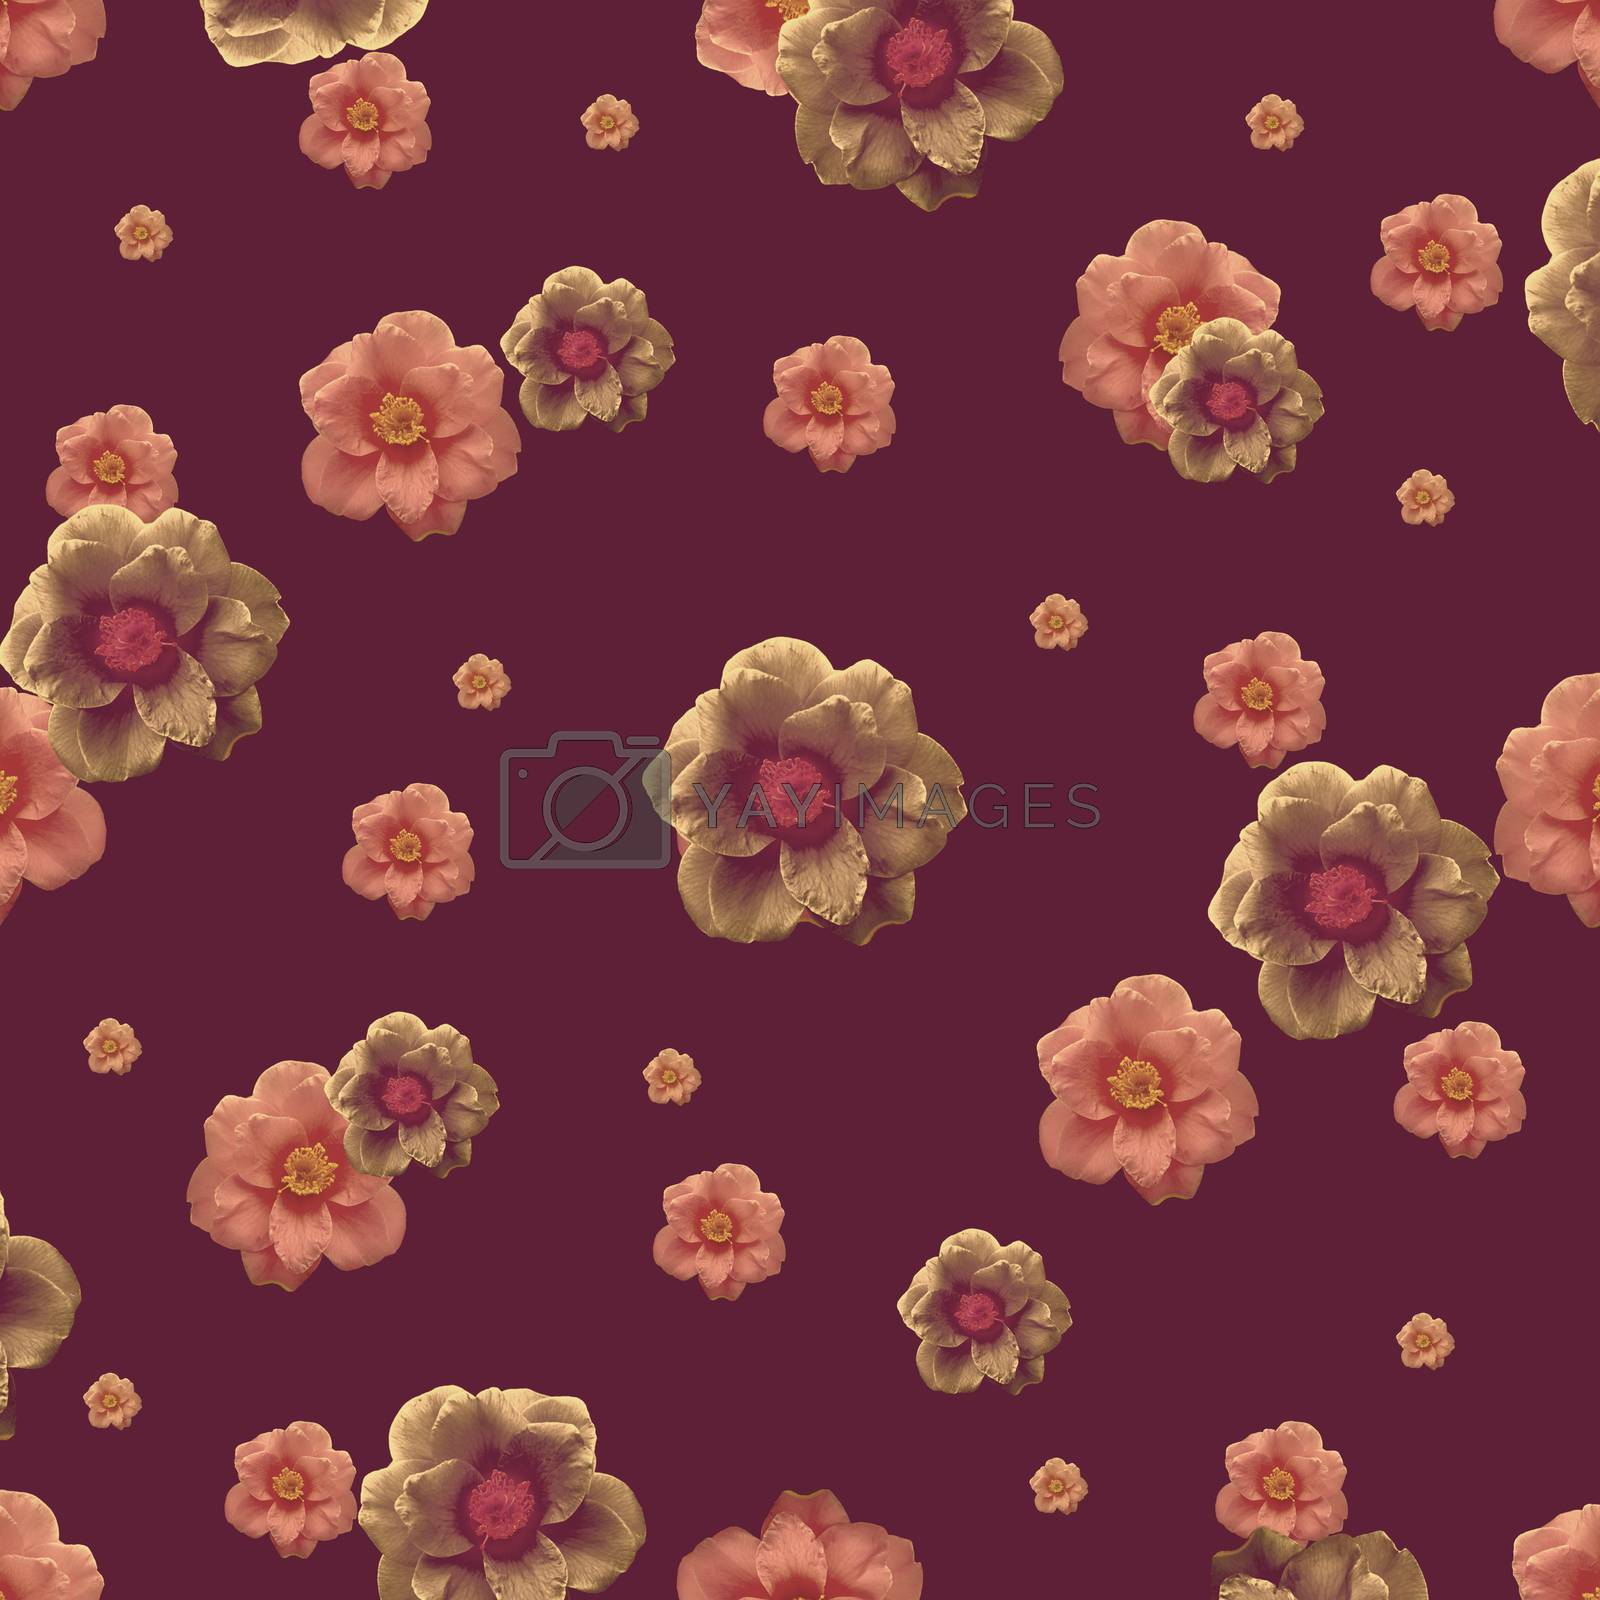 Royalty free image of Warm Flowers Collage Motif Pattern by DanFLCreative